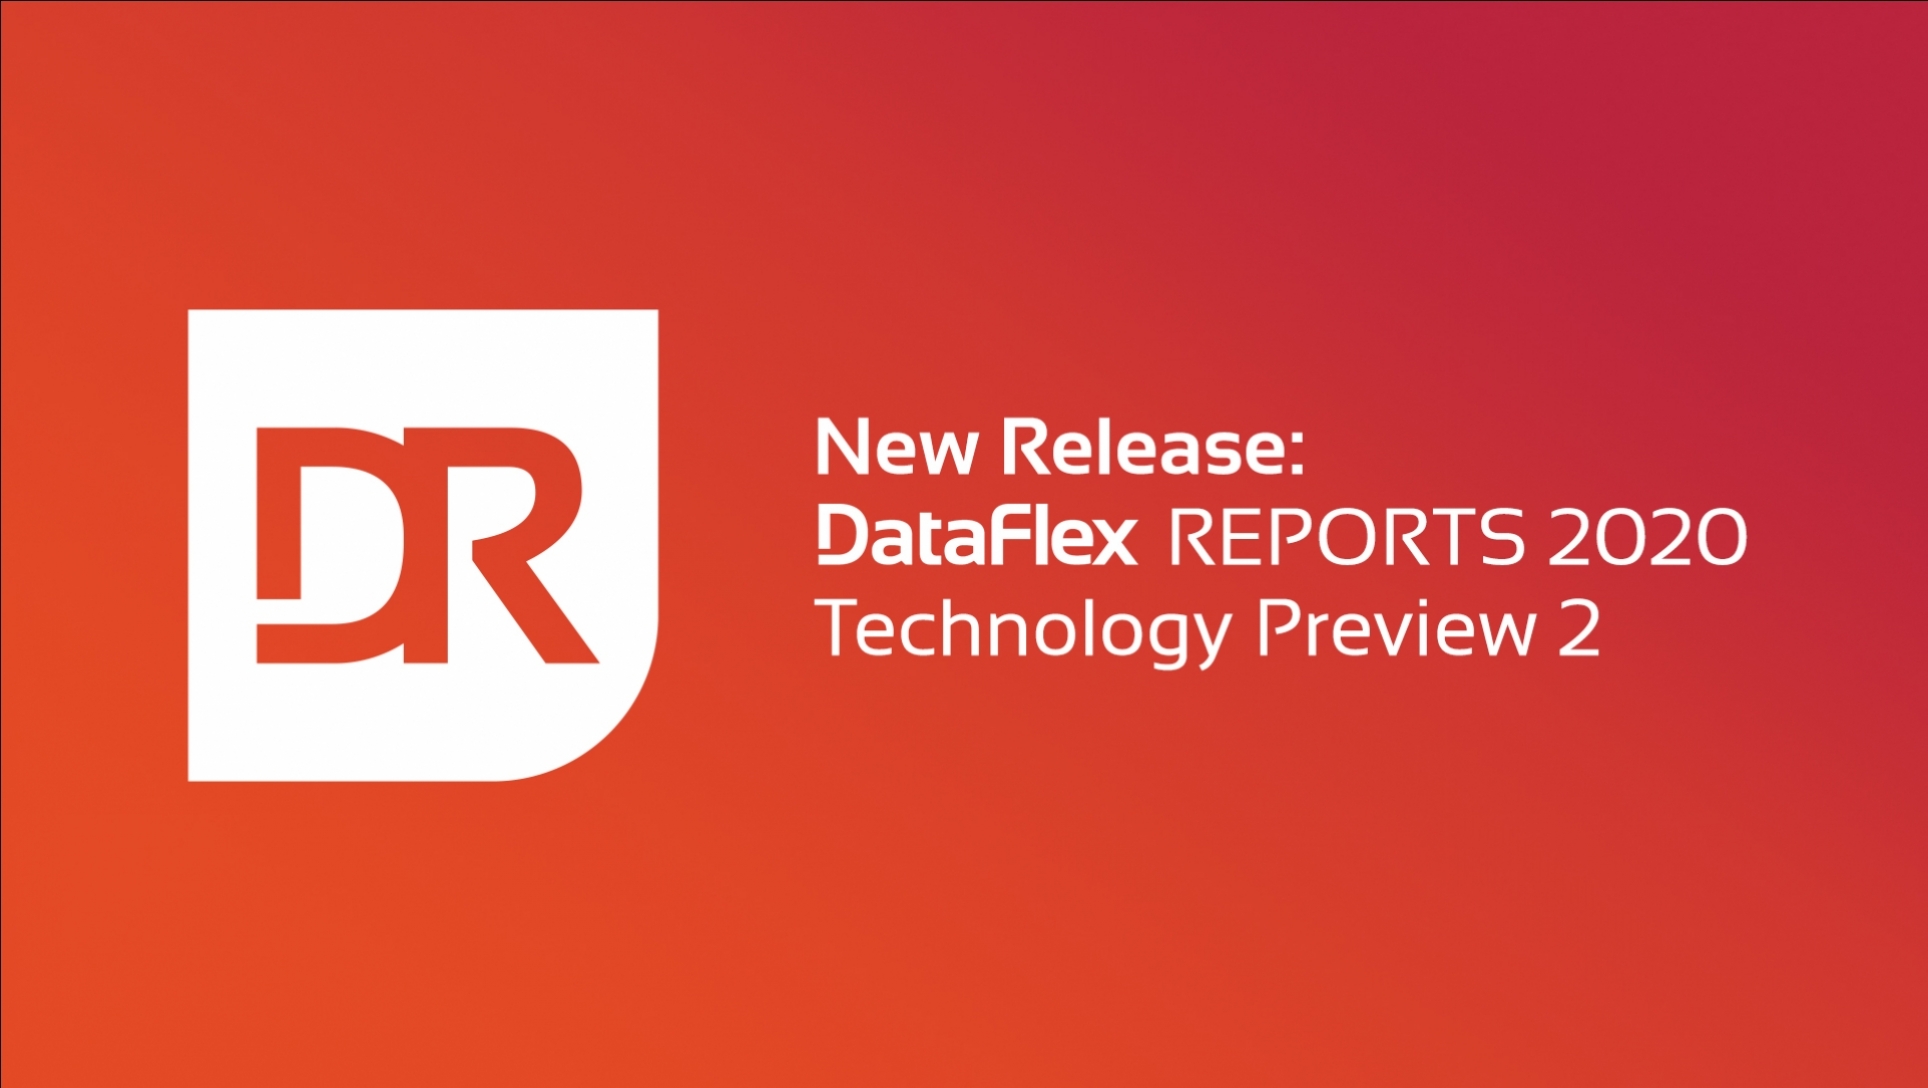 Technology Preview 2 of DataFlex Reports 2020